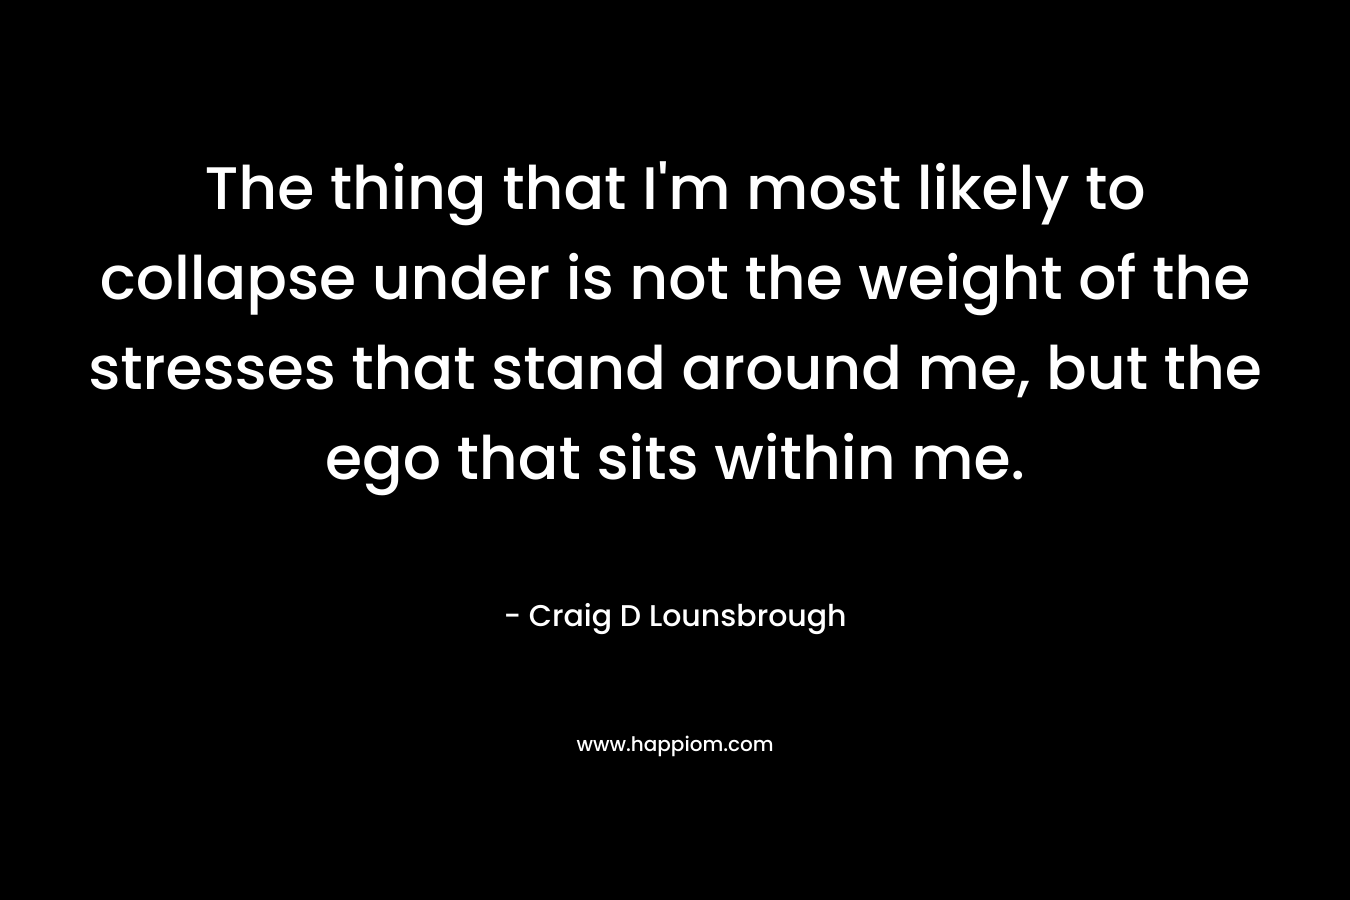 The thing that I’m most likely to collapse under is not the weight of the stresses that stand around me, but the ego that sits within me. – Craig D Lounsbrough